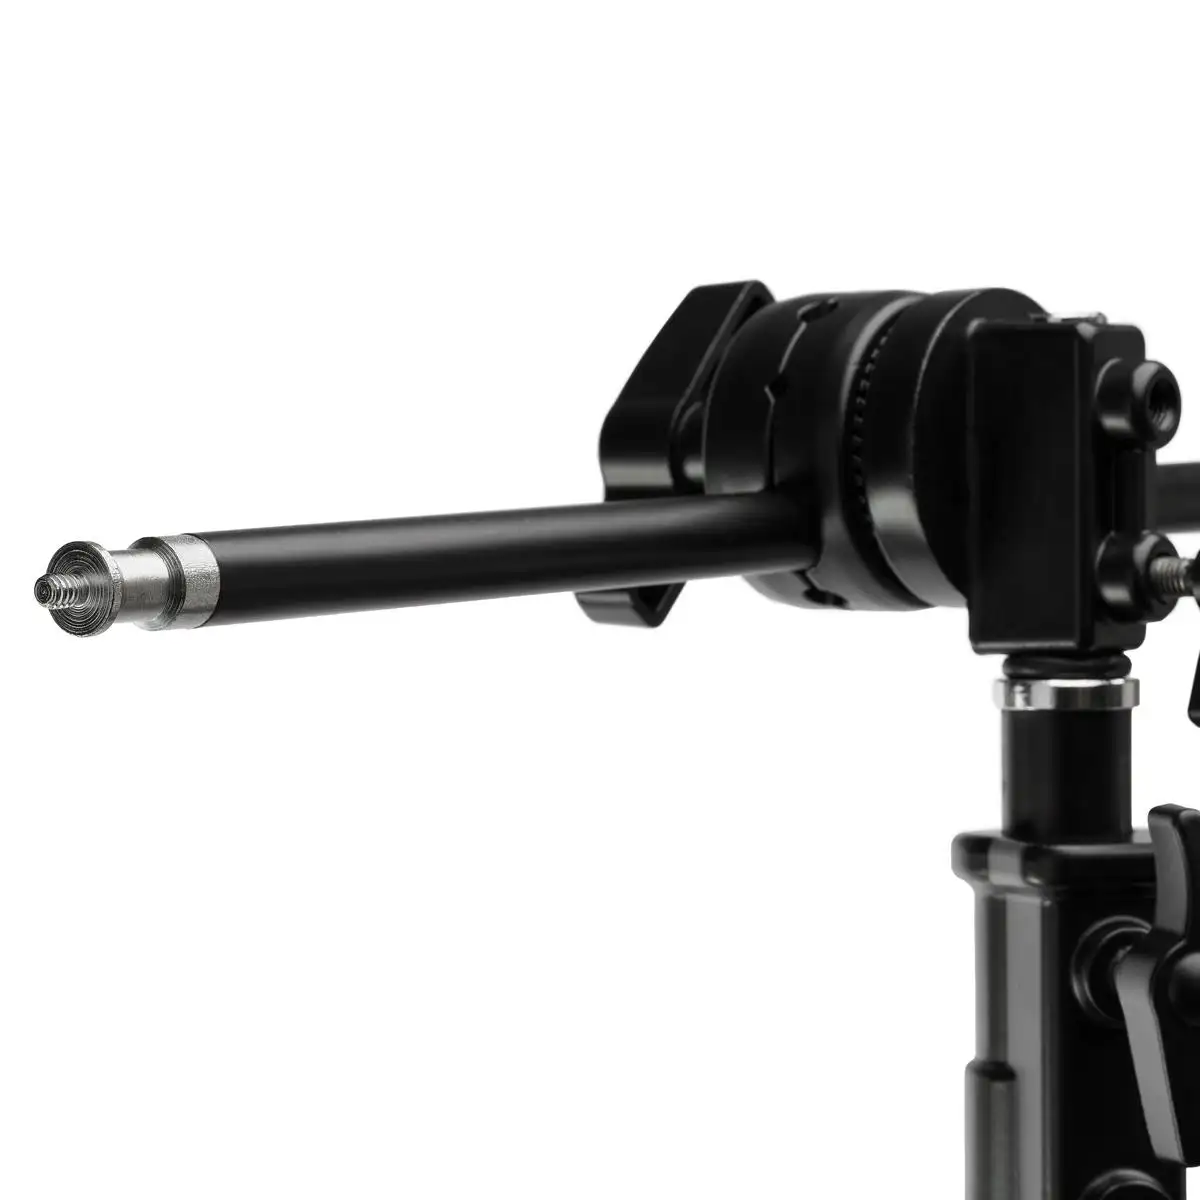 Black Stainless Steel Heavy Duty C Stand 1.5-3.3 Meters Adjustable Photography Sturdy Tripod with cross bar